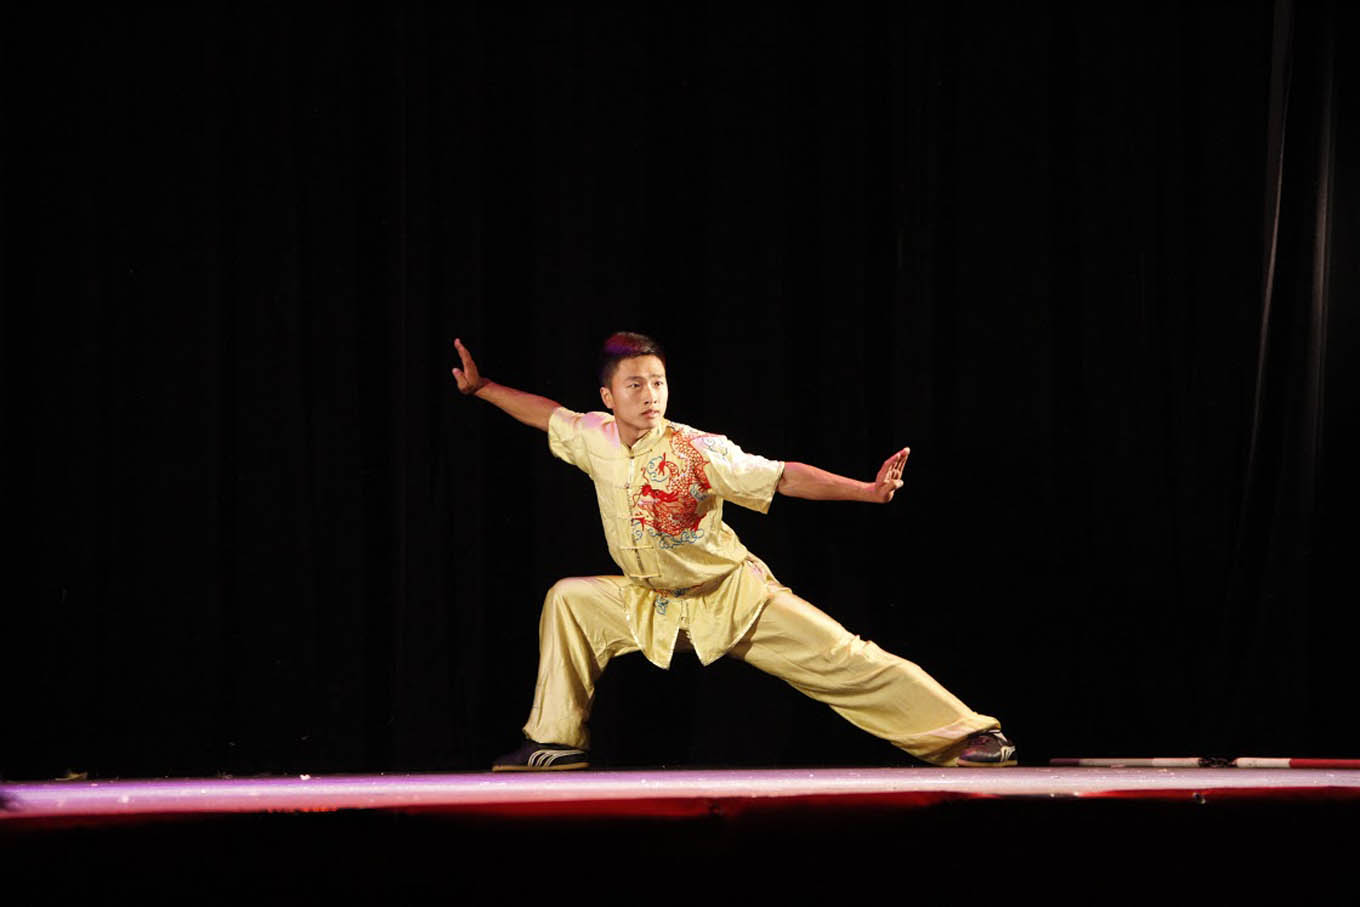 CCCC will host Chinese Culture & Arts performance